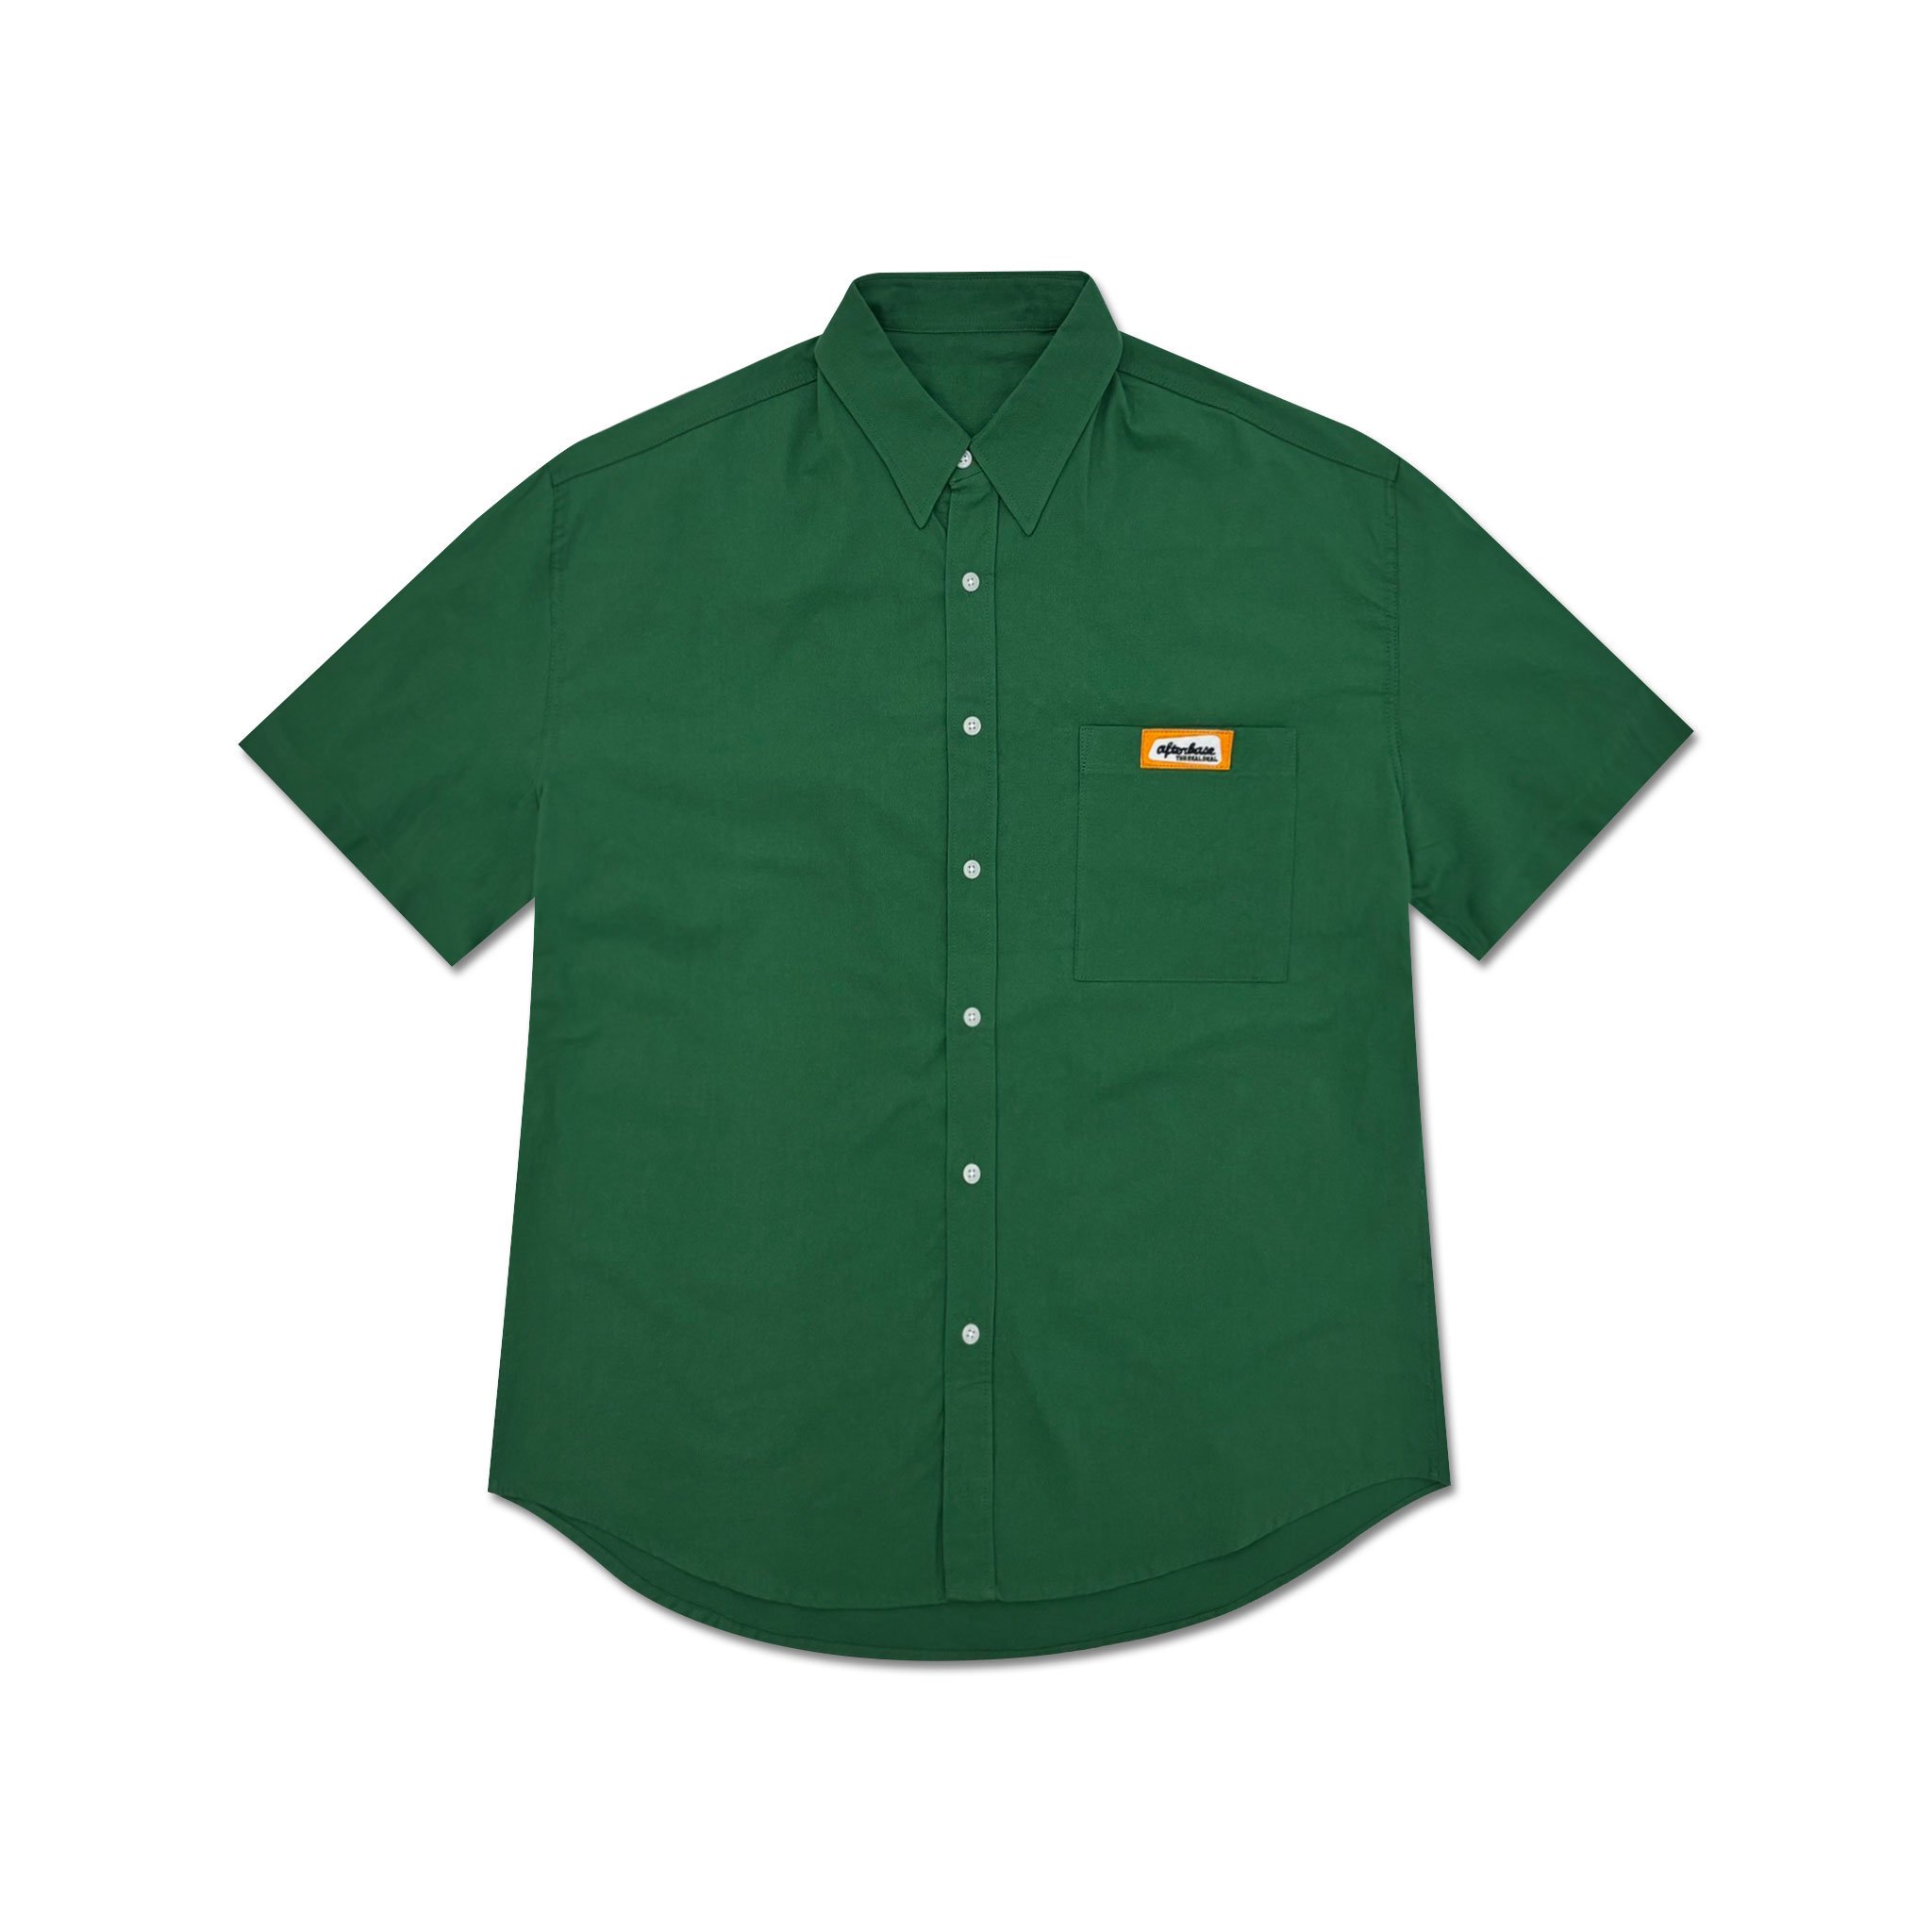 <img class='new_mark_img1' src='https://img.shop-pro.jp/img/new/icons5.gif' style='border:none;display:inline;margin:0px;padding:0px;width:auto;' />[FOREST] 顼 COLOR SHIRT